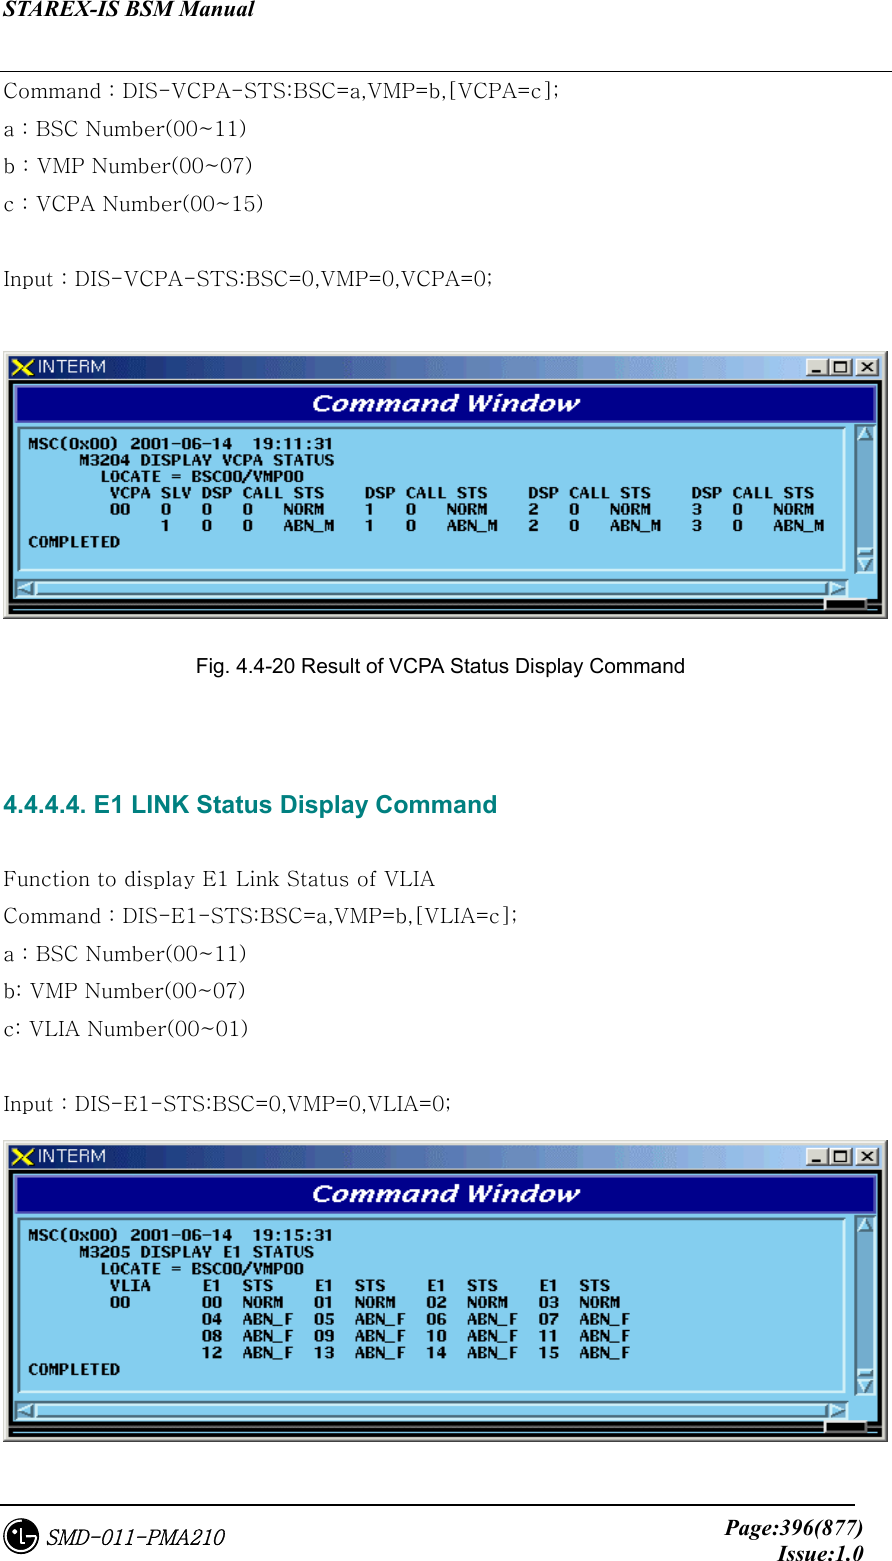 STAREX-IS BSM Manual     Page:396(877)Issue:1.0SMD-011-PMA210 Command : DIS-VCPA-STS:BSC=a,VMP=b,[VCPA=c]; a : BSC Number(00~11) b : VMP Number(00~07) c : VCPA Number(00~15)  Input : DIS-VCPA-STS:BSC=0,VMP=0,VCPA=0;   Fig. 4.4-20 Result of VCPA Status Display Command   4.4.4.4. E1 LINK Status Display Command  Function to display E1 Link Status of VLIA Command : DIS-E1-STS:BSC=a,VMP=b,[VLIA=c]; a : BSC Number(00~11) b: VMP Number(00~07) c: VLIA Number(00~01)  Input : DIS-E1-STS:BSC=0,VMP=0,VLIA=0;  